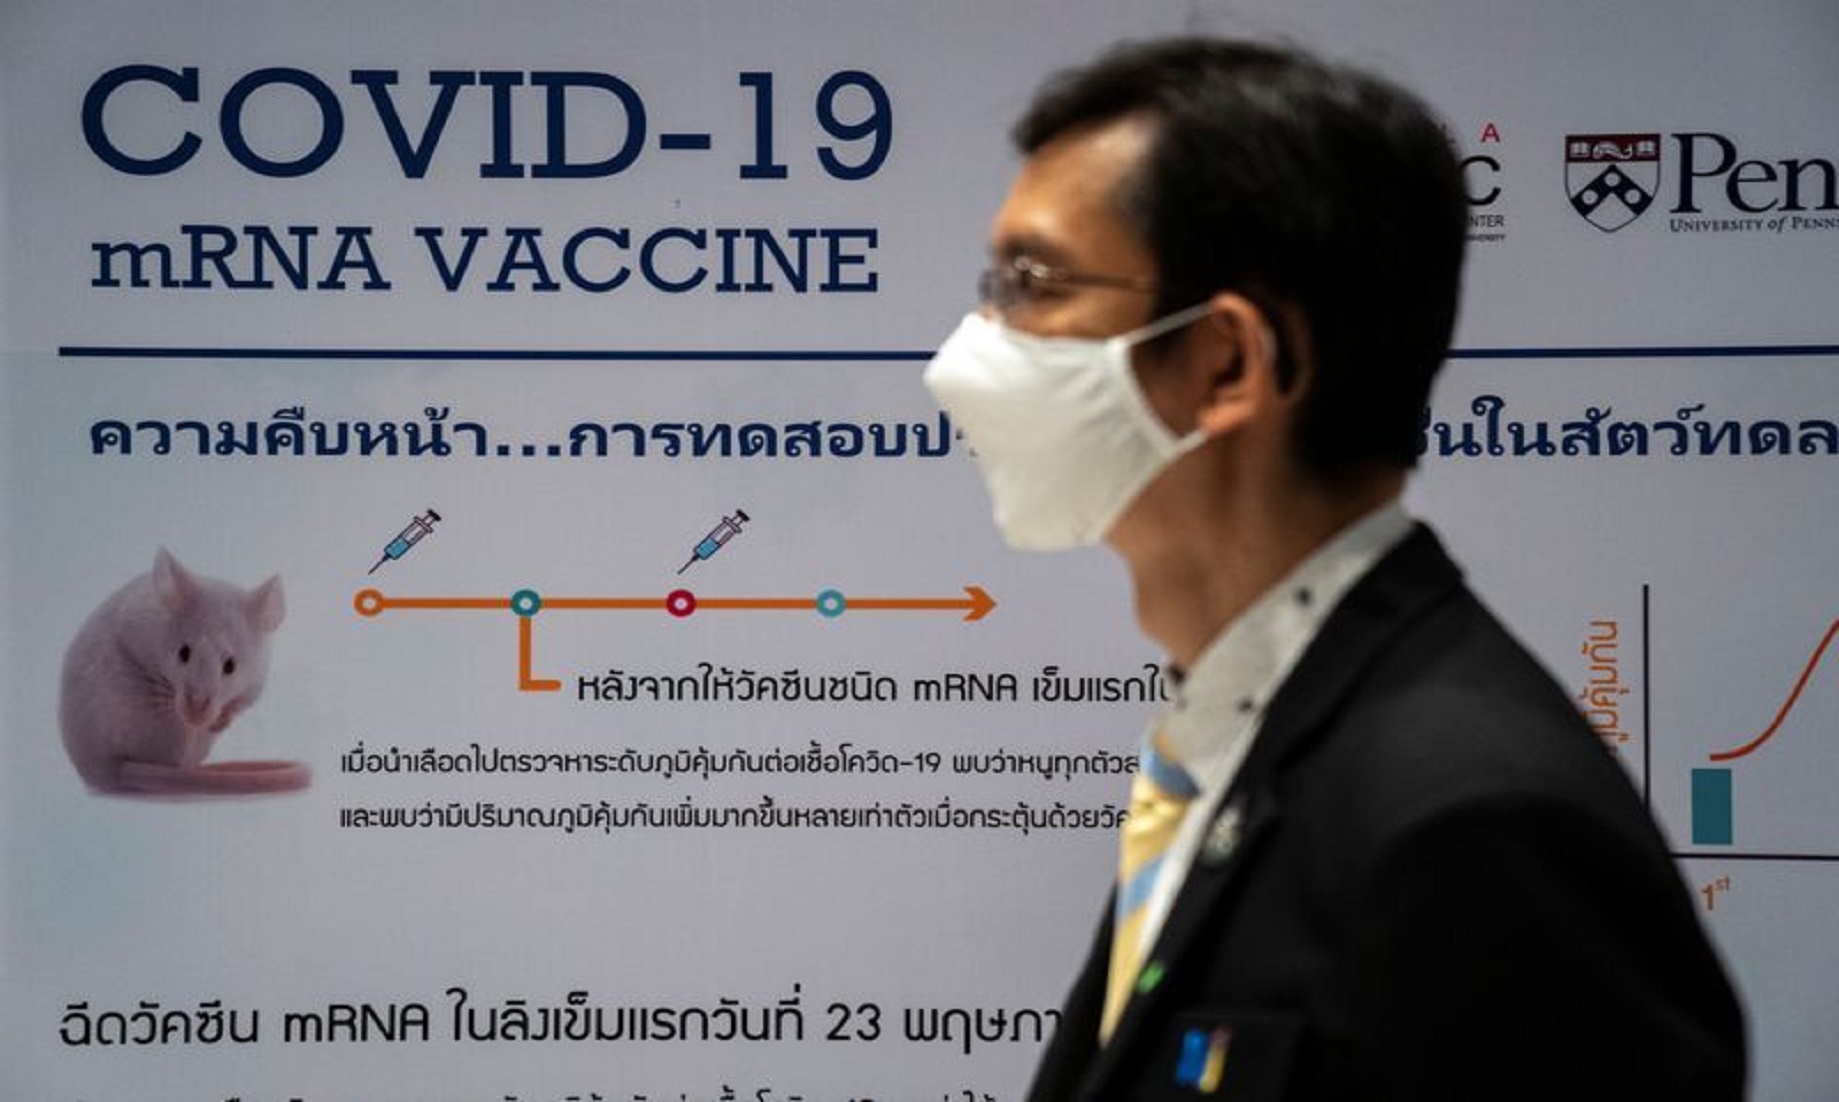 Thailand Hopes To Produce Home-Grown COVID-19 Vaccine By Year End